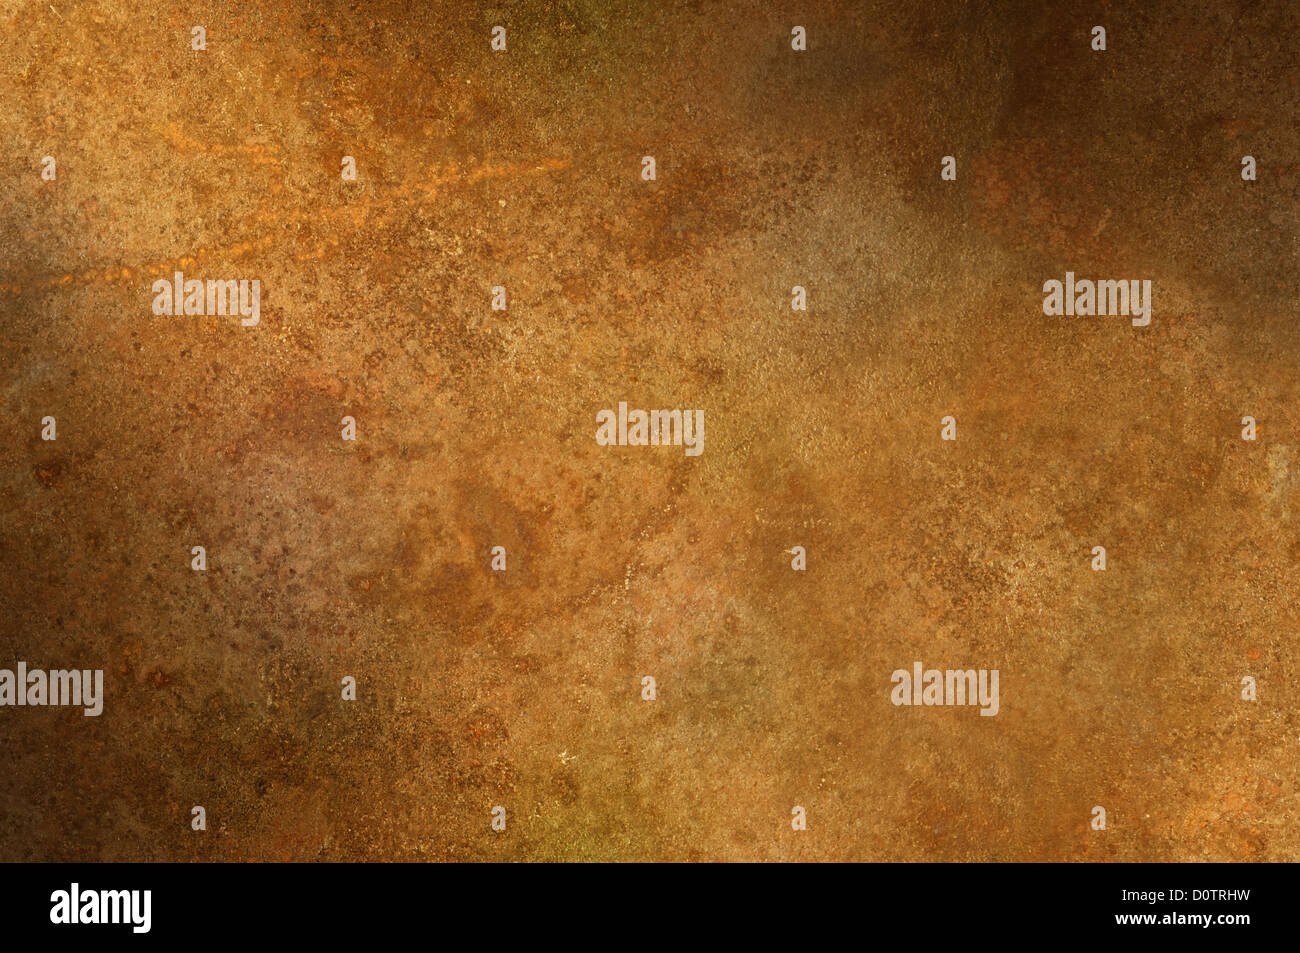 Grungy distressed rusty surface texture lit diagonally Stock Photo